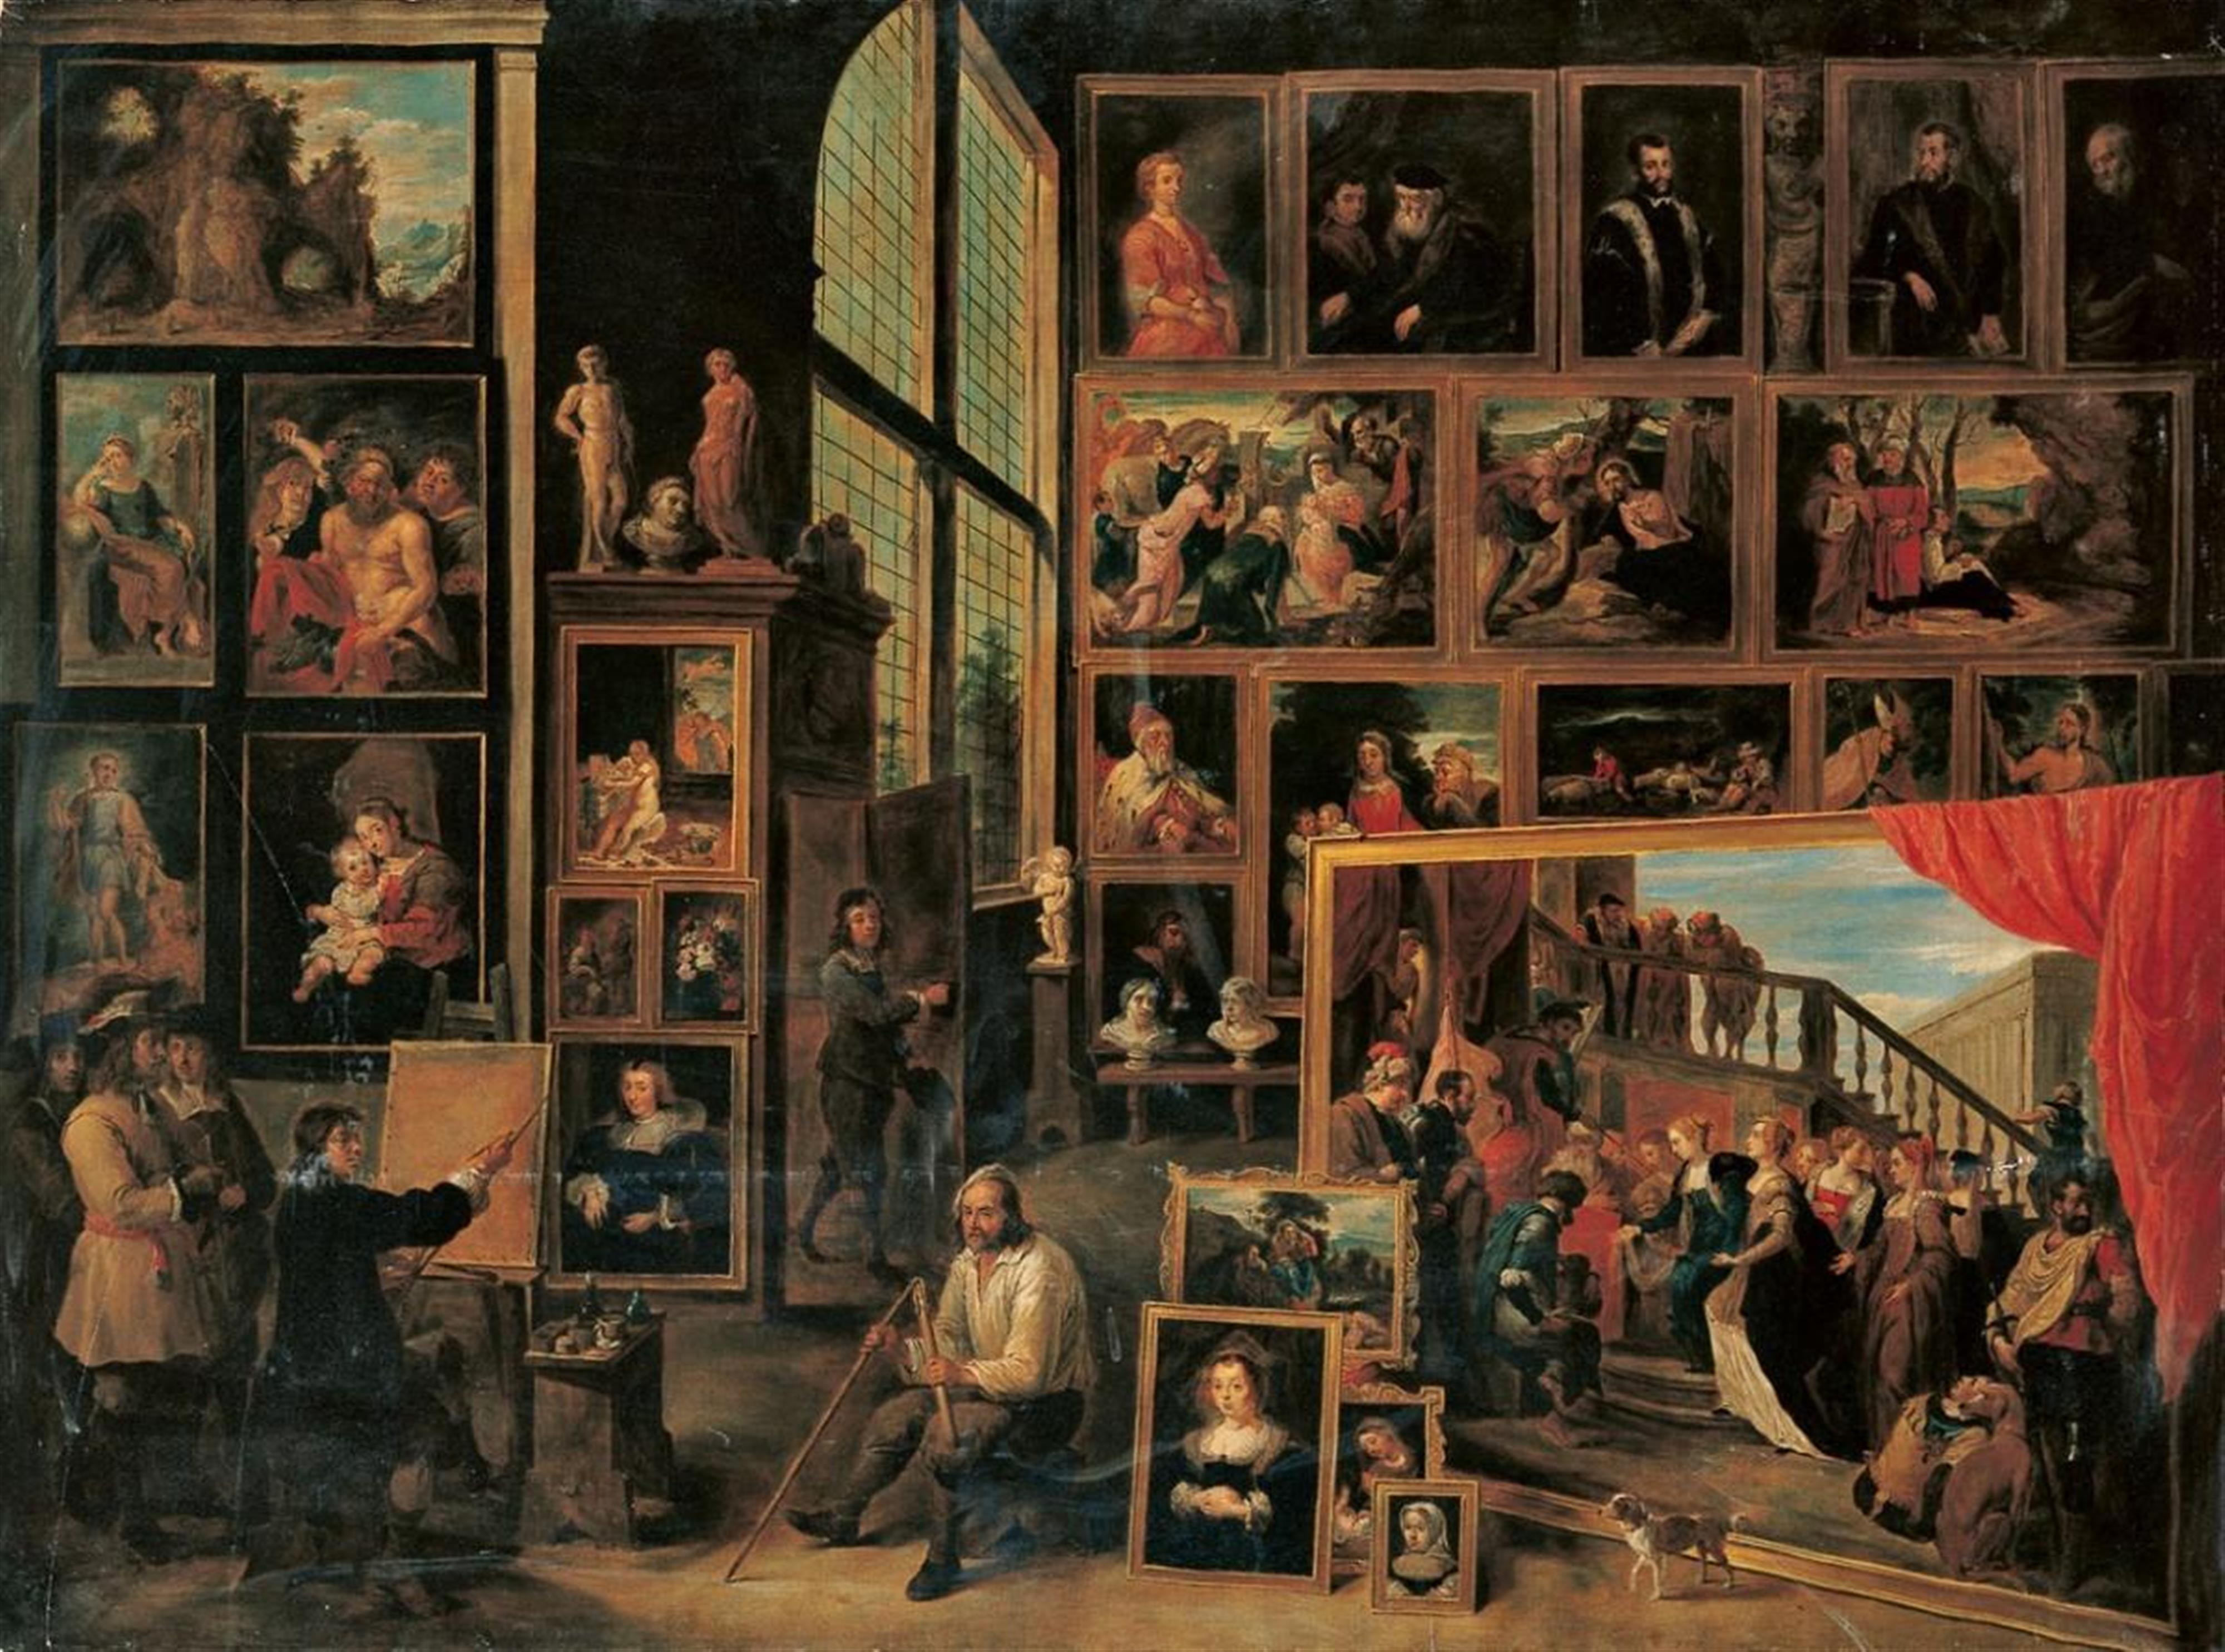 Flemish School (?), 19th century - PICTURE GALLERY WITH PAINTER AT THE EASEL - image-1